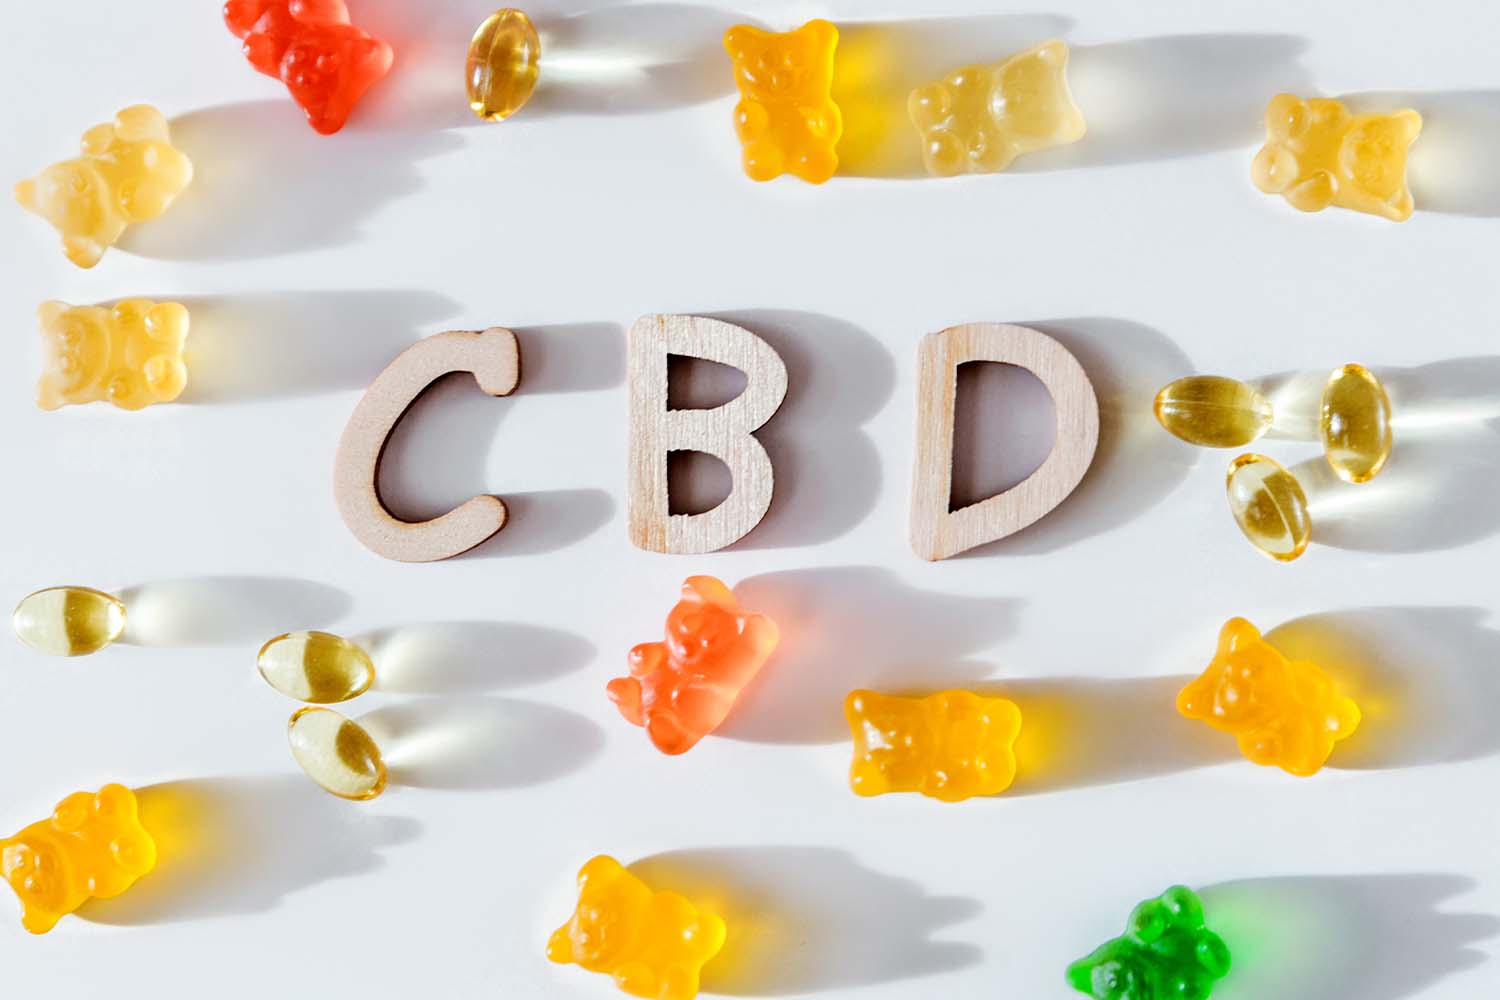 Can You Take CBD Oil On A Plane? What You Should Know